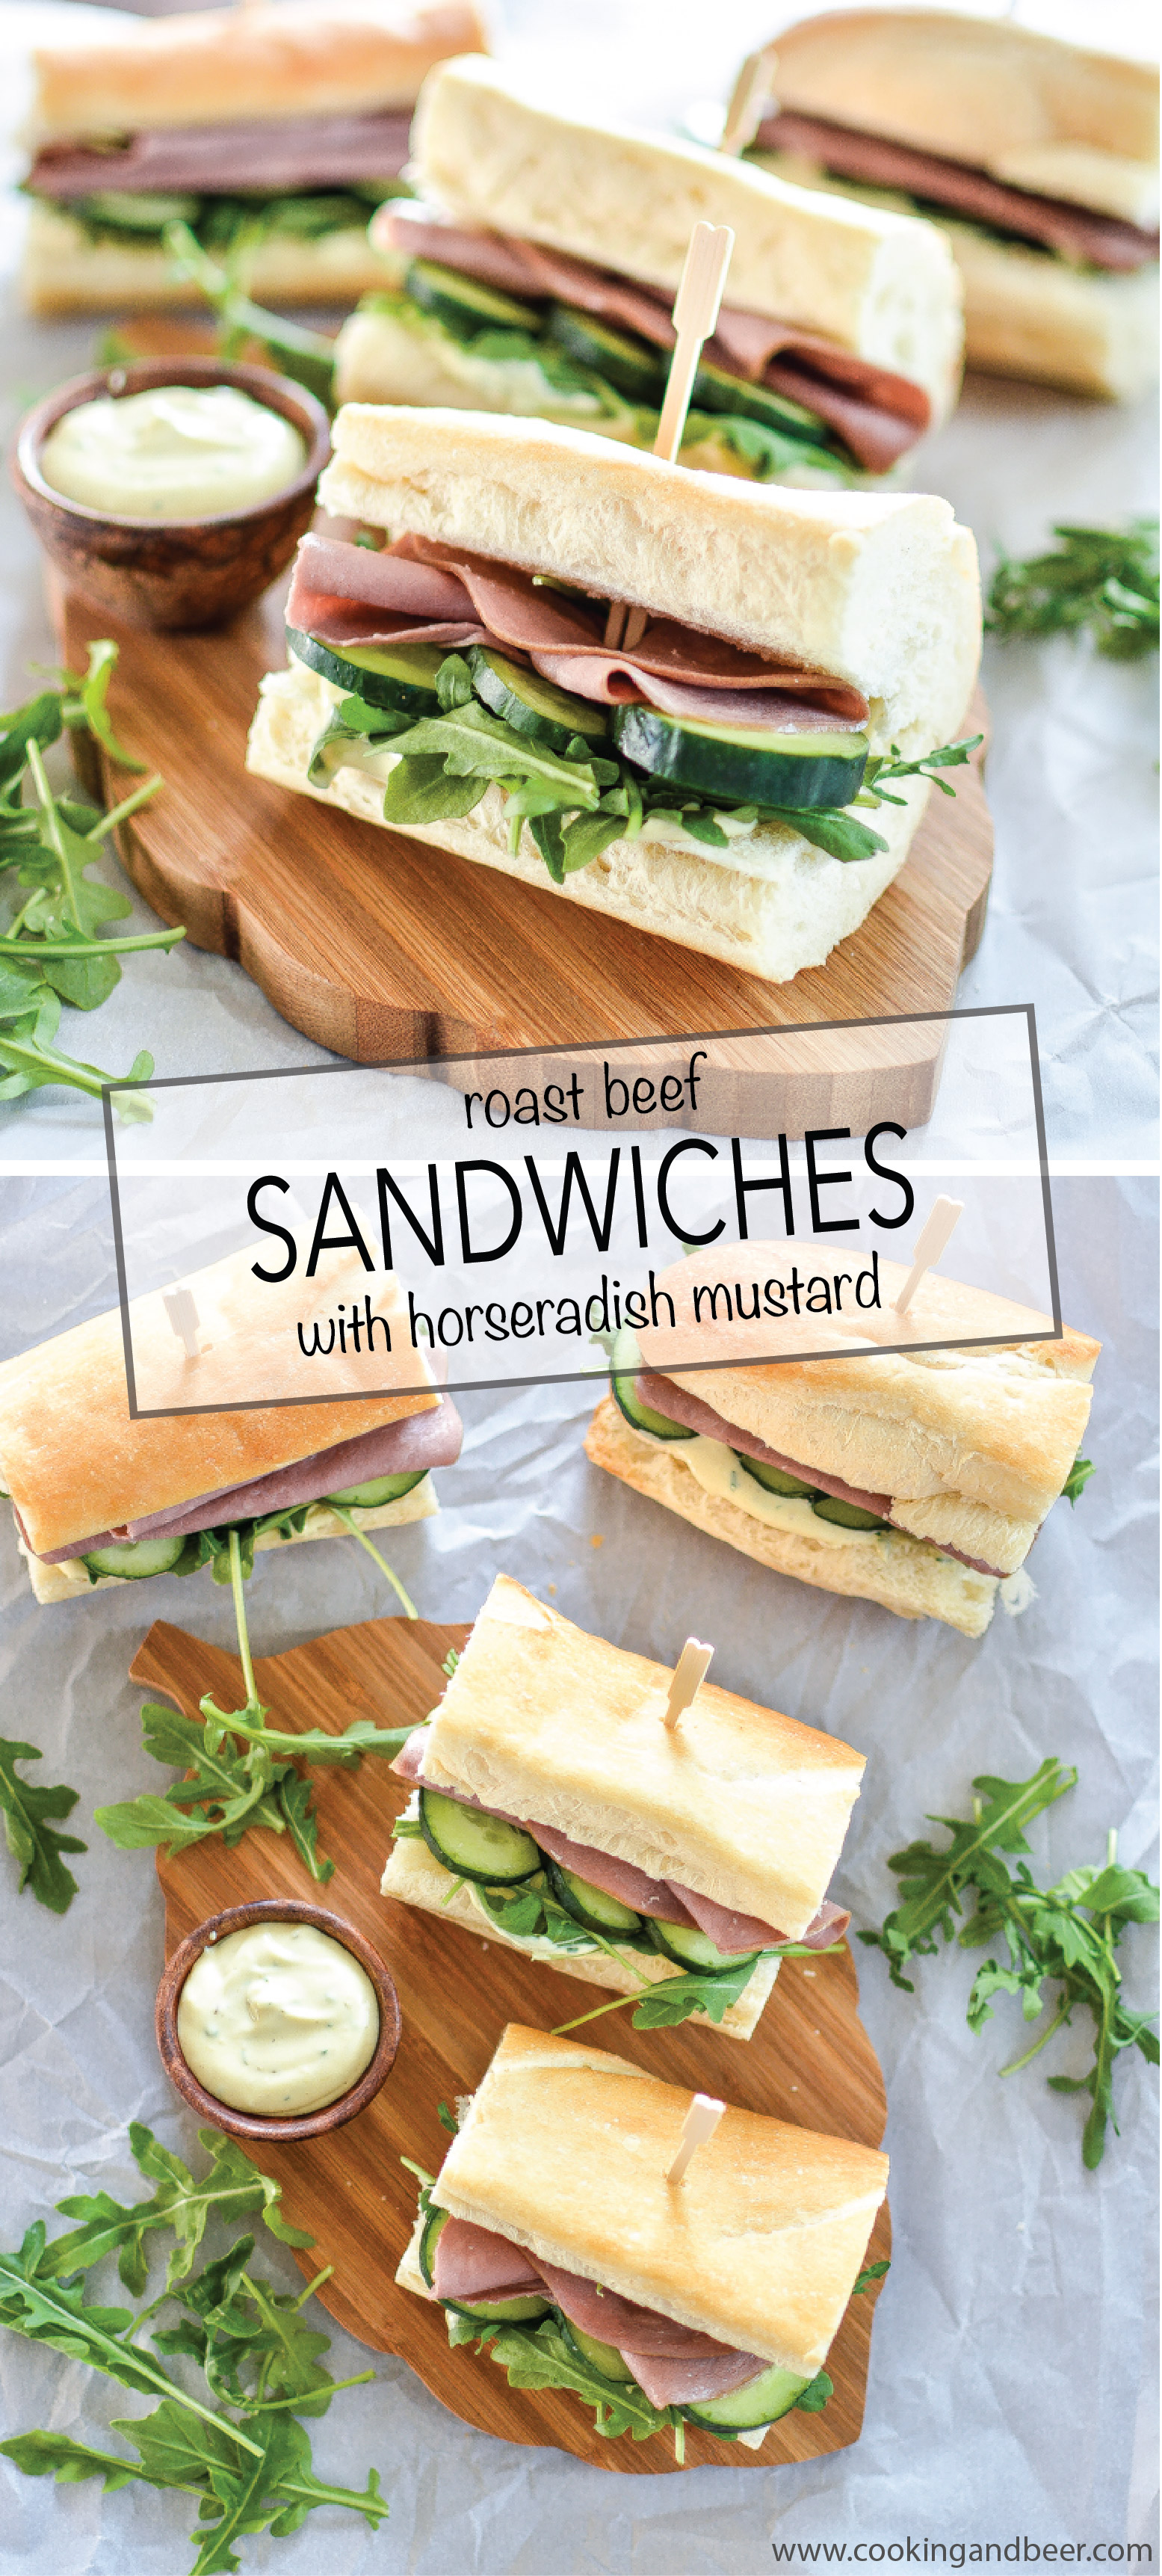 Lunch is served with these Roast Crimson meat Sandwiches with Horseradish Mustard! | www.cookingandbeer.com  Roast Crimson meat Sandwiches with Horseradish Mustard roastbeefsammiescollage